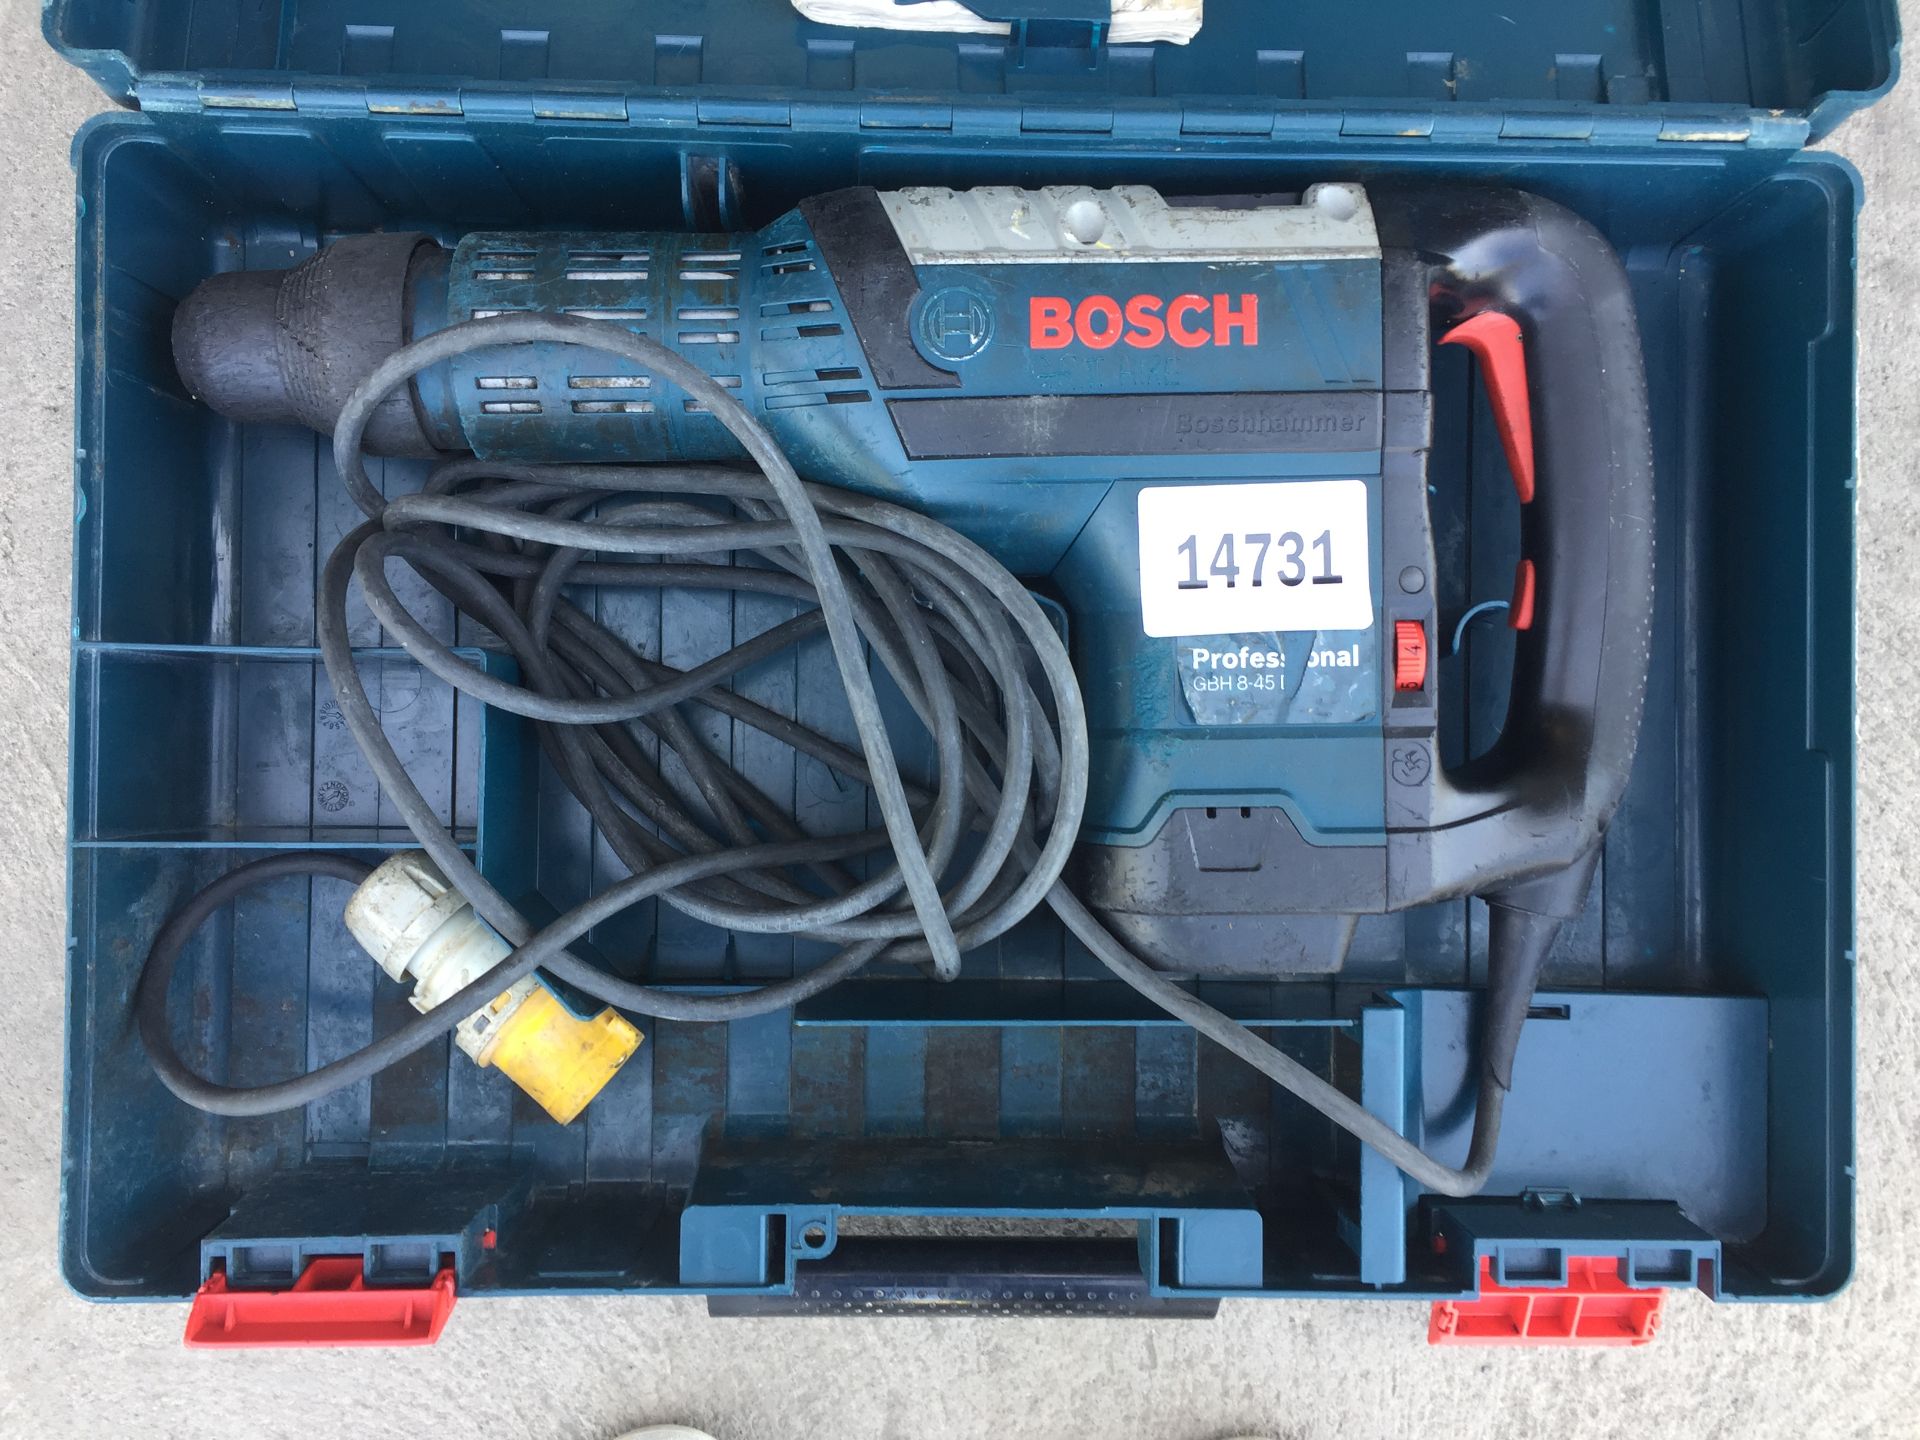 PL-14731 Bosch GBH8.45 Hammer Drill In Case - Image 2 of 3